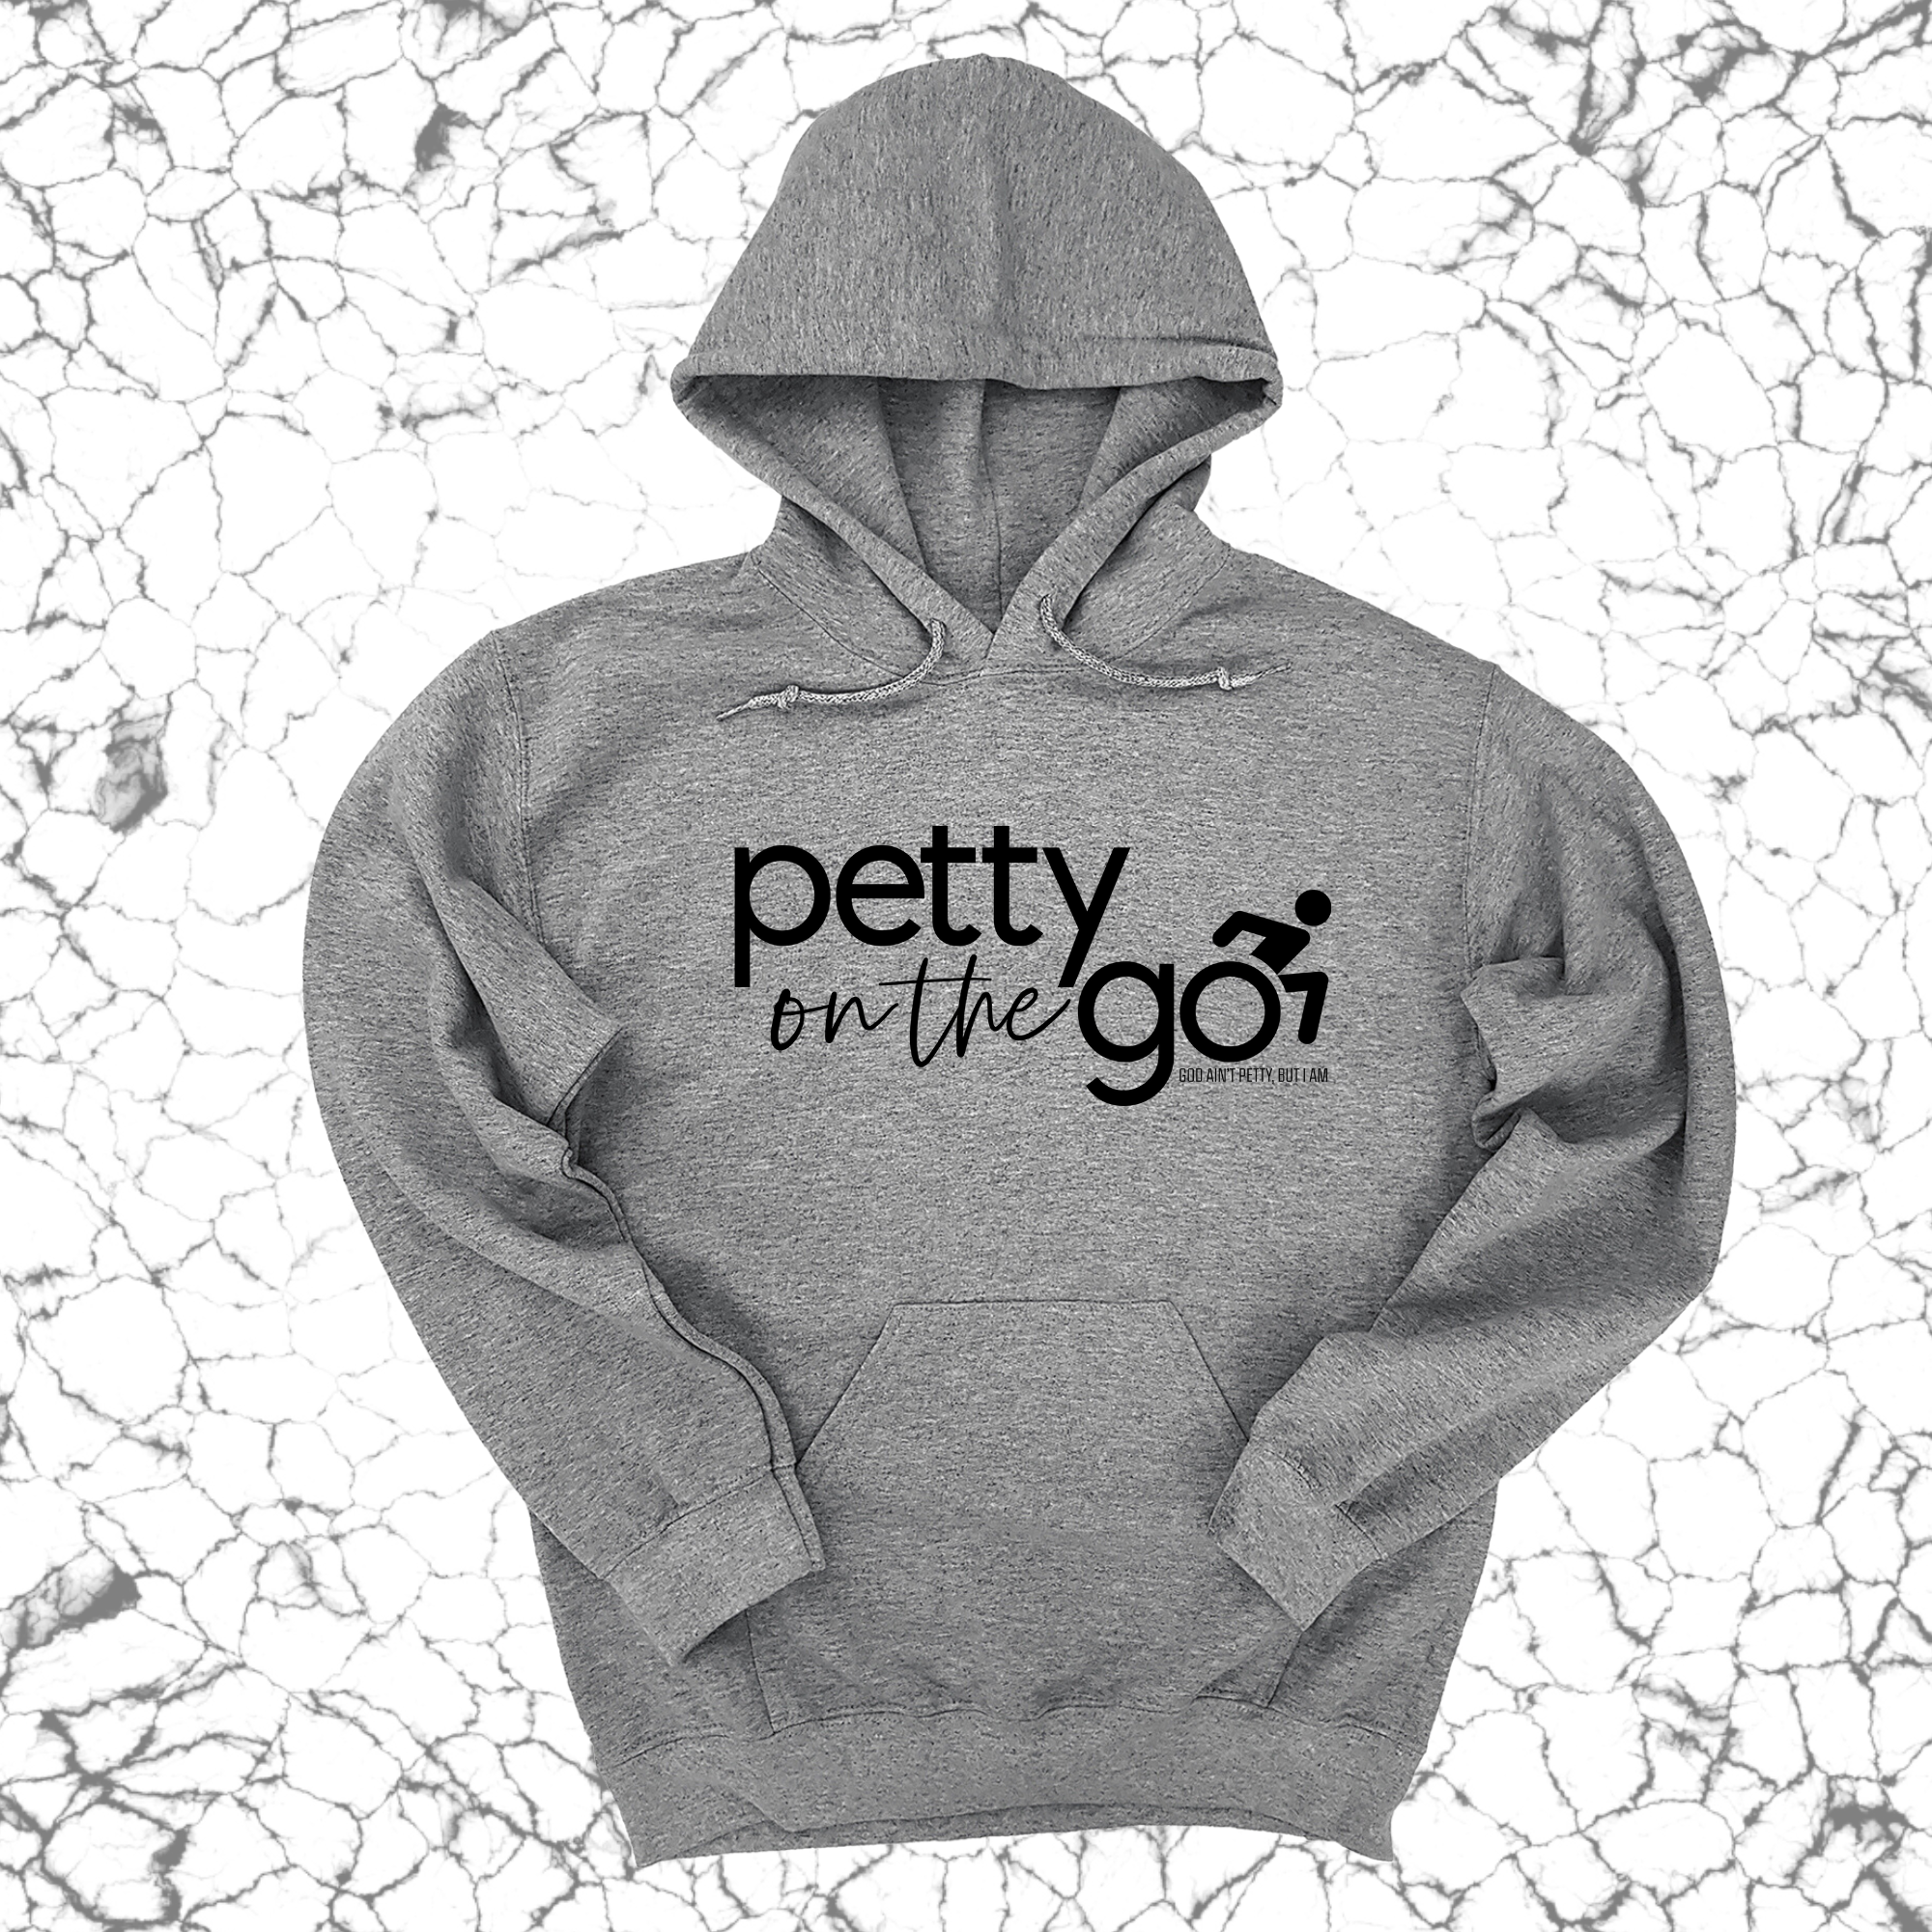 Petty on the Go Unisex Hoodie-Hoodie-The Original God Ain't Petty But I Am